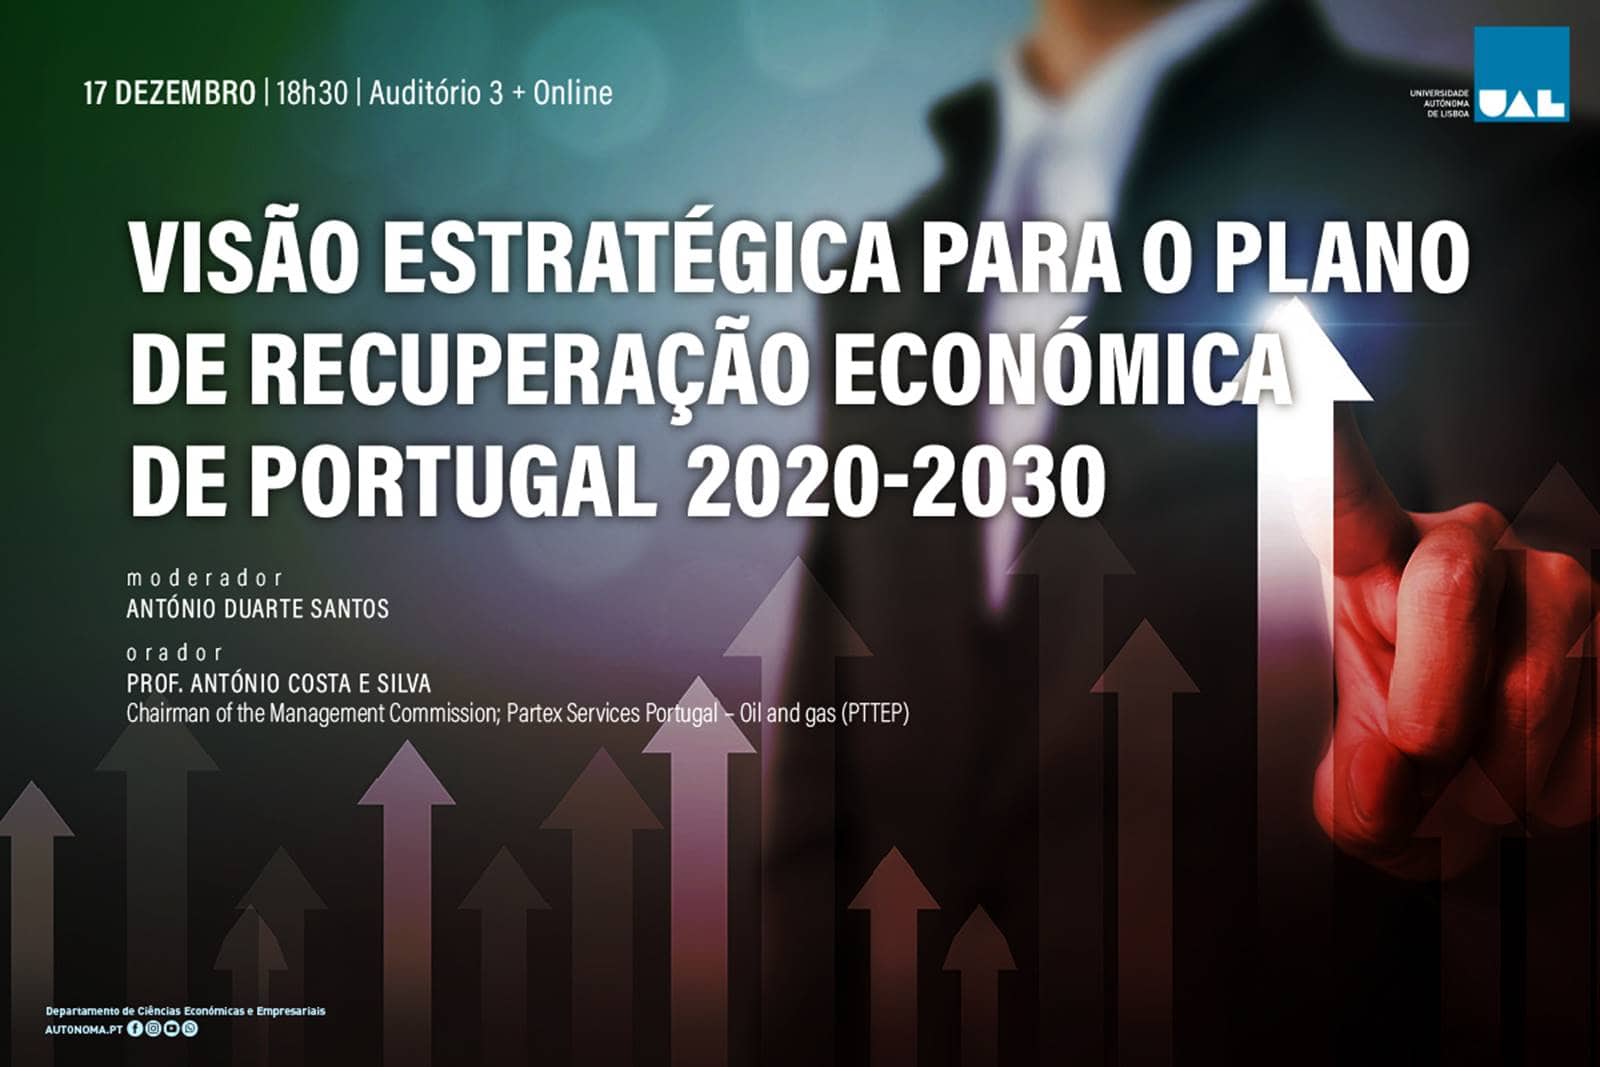 Strategic Vision for Portugal's Economic Recovery Plan 2020-2030